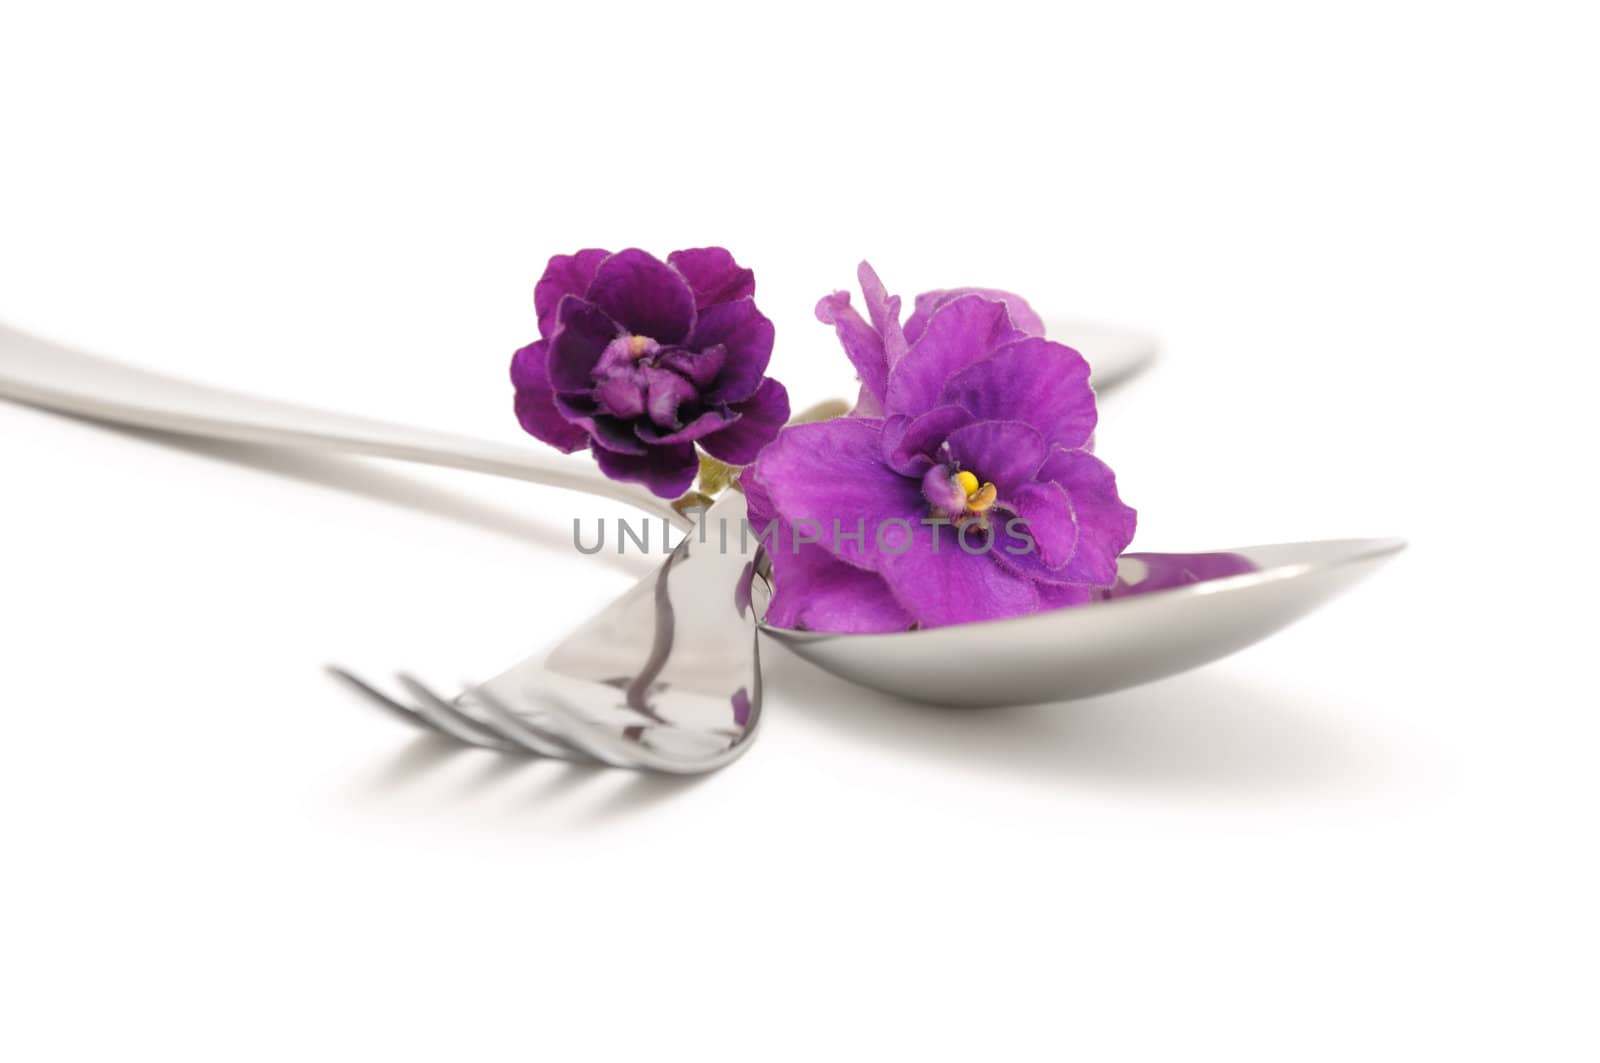 Spoon and fork with violets   by Apolonia